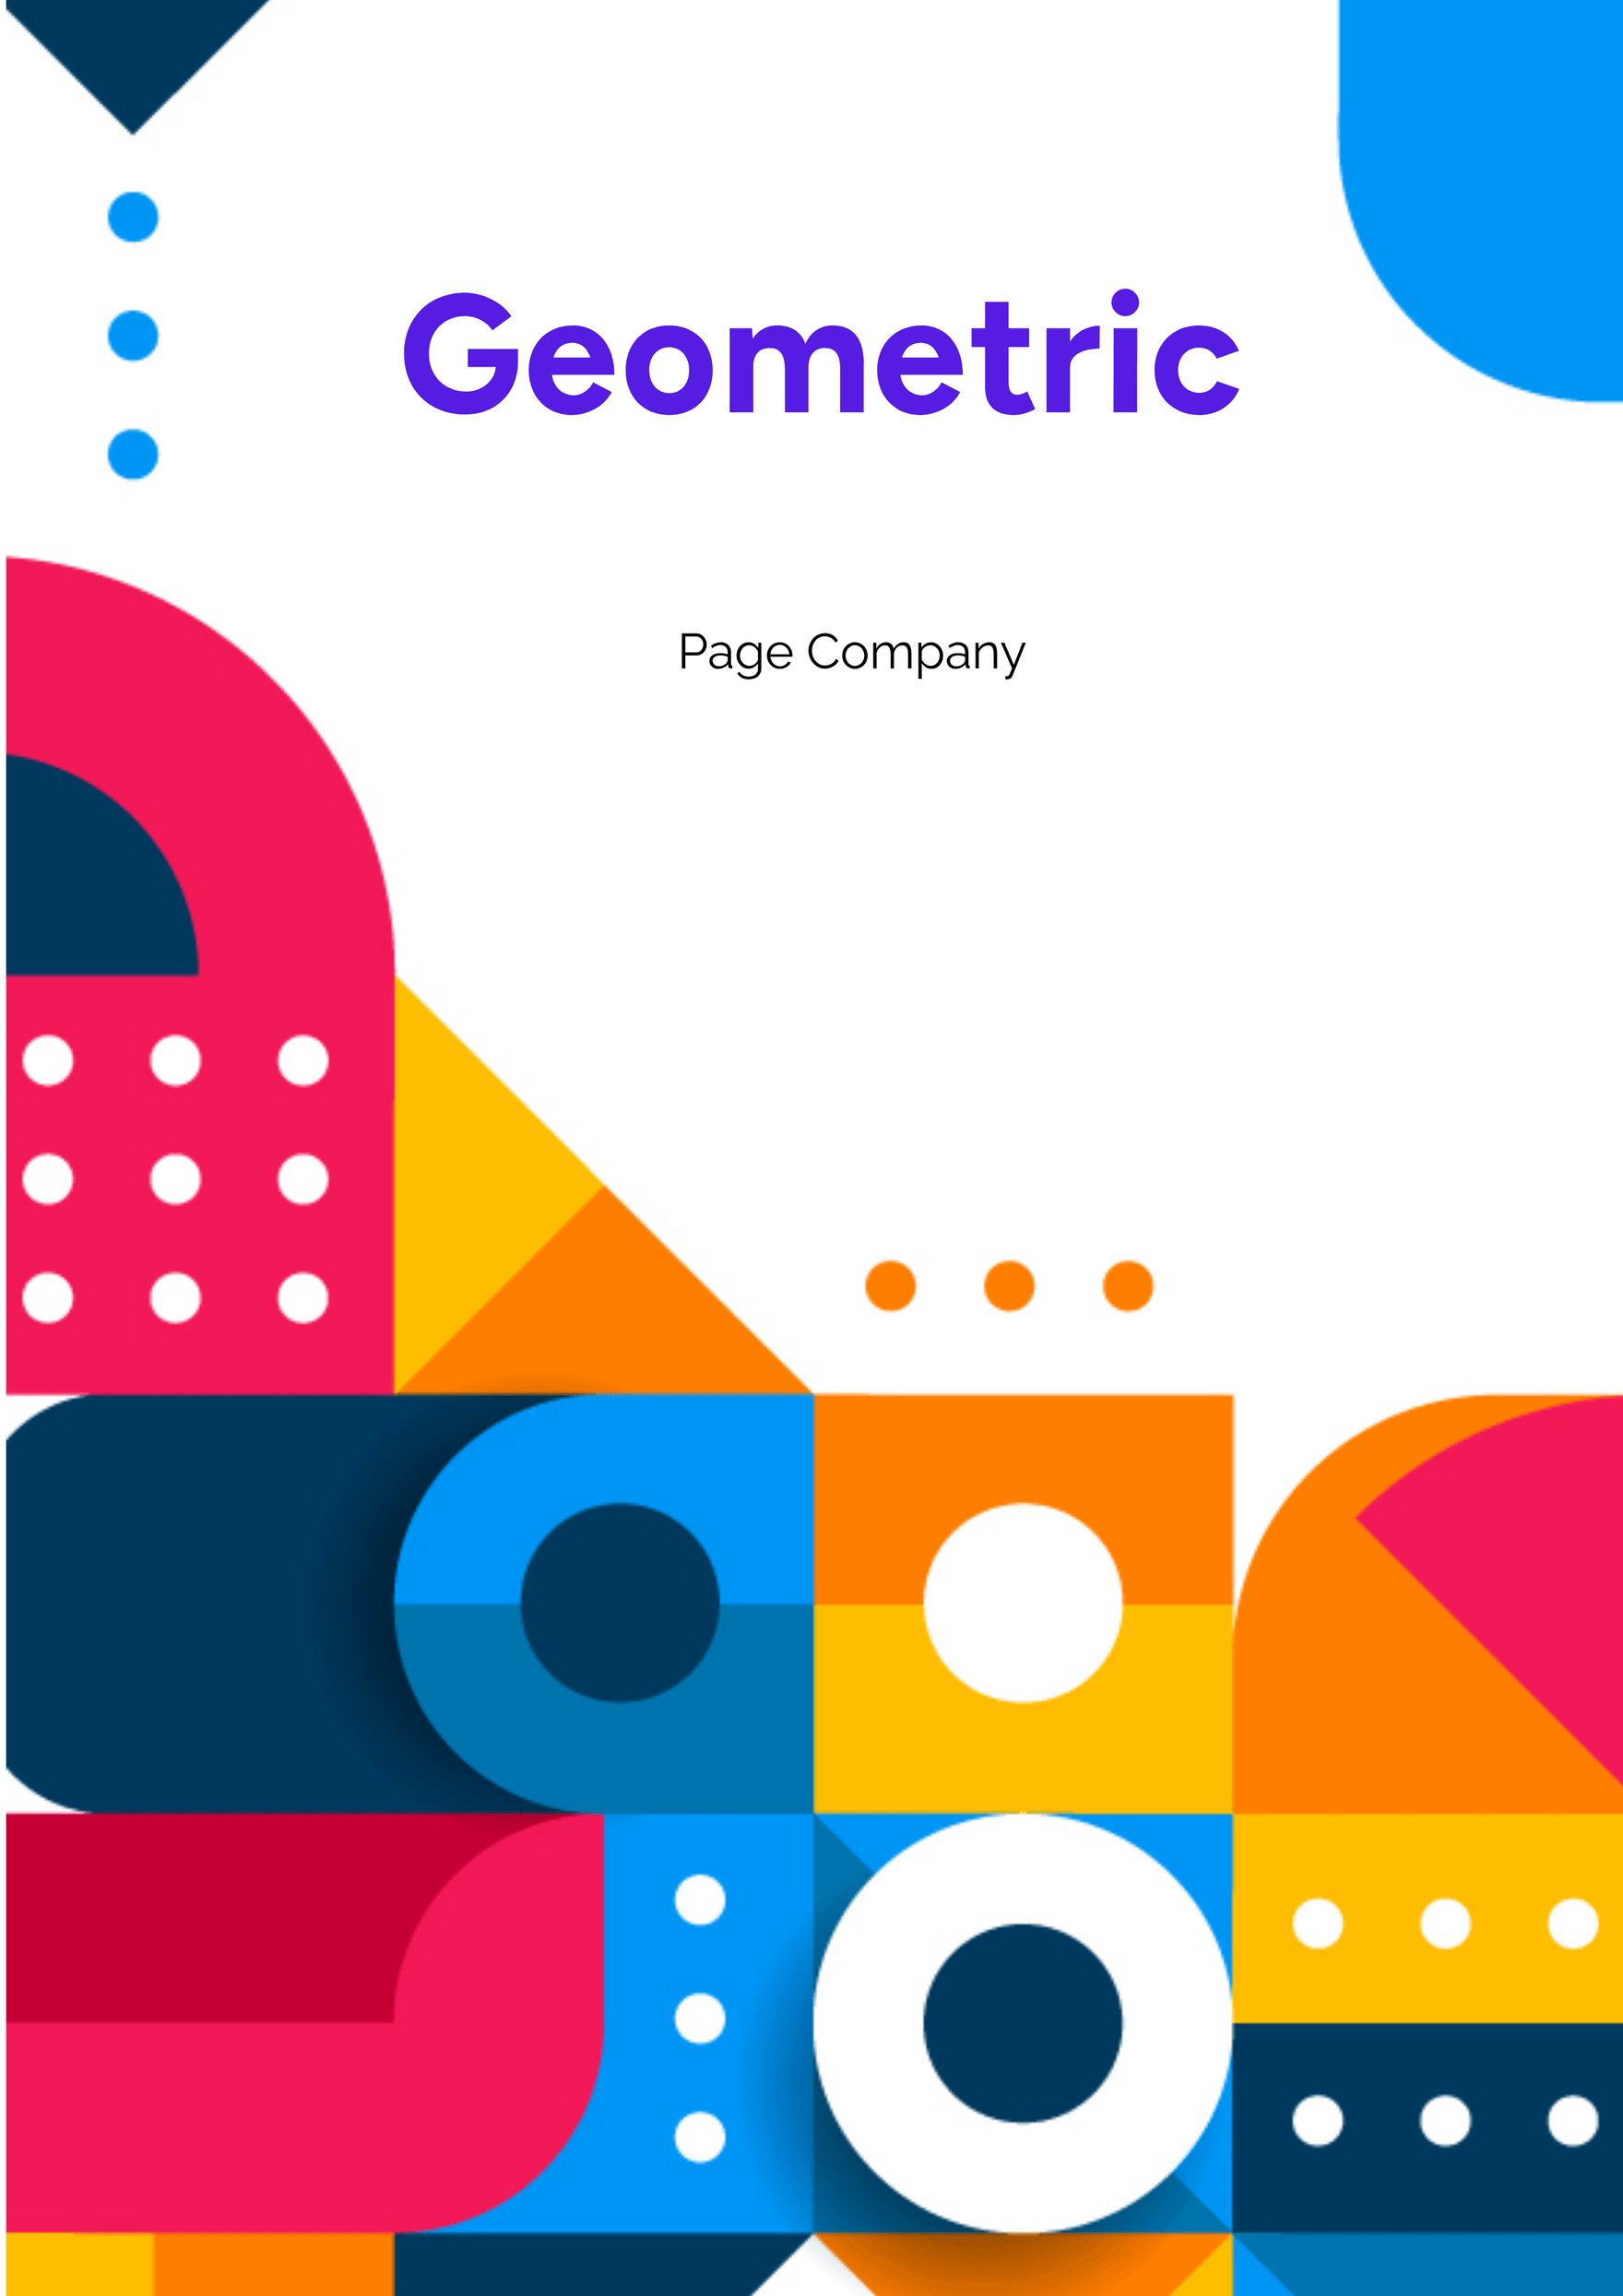 Geometric Cover Page Company Template